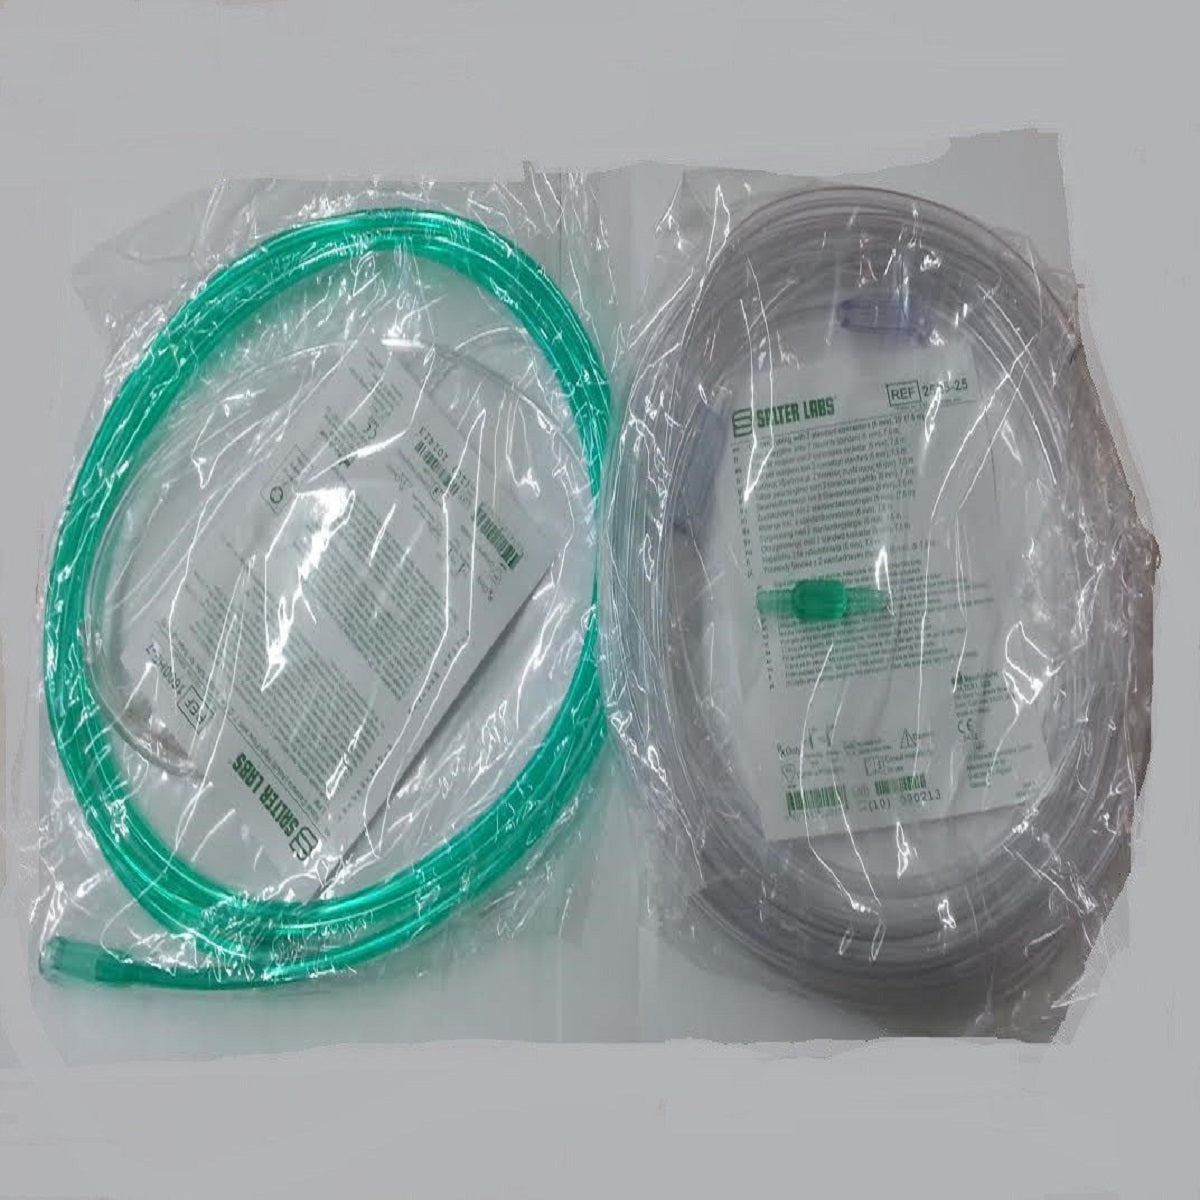 Oxygen Tubing Starter Pack. 25' Hose, 7' Cannula or Mask and Connector!